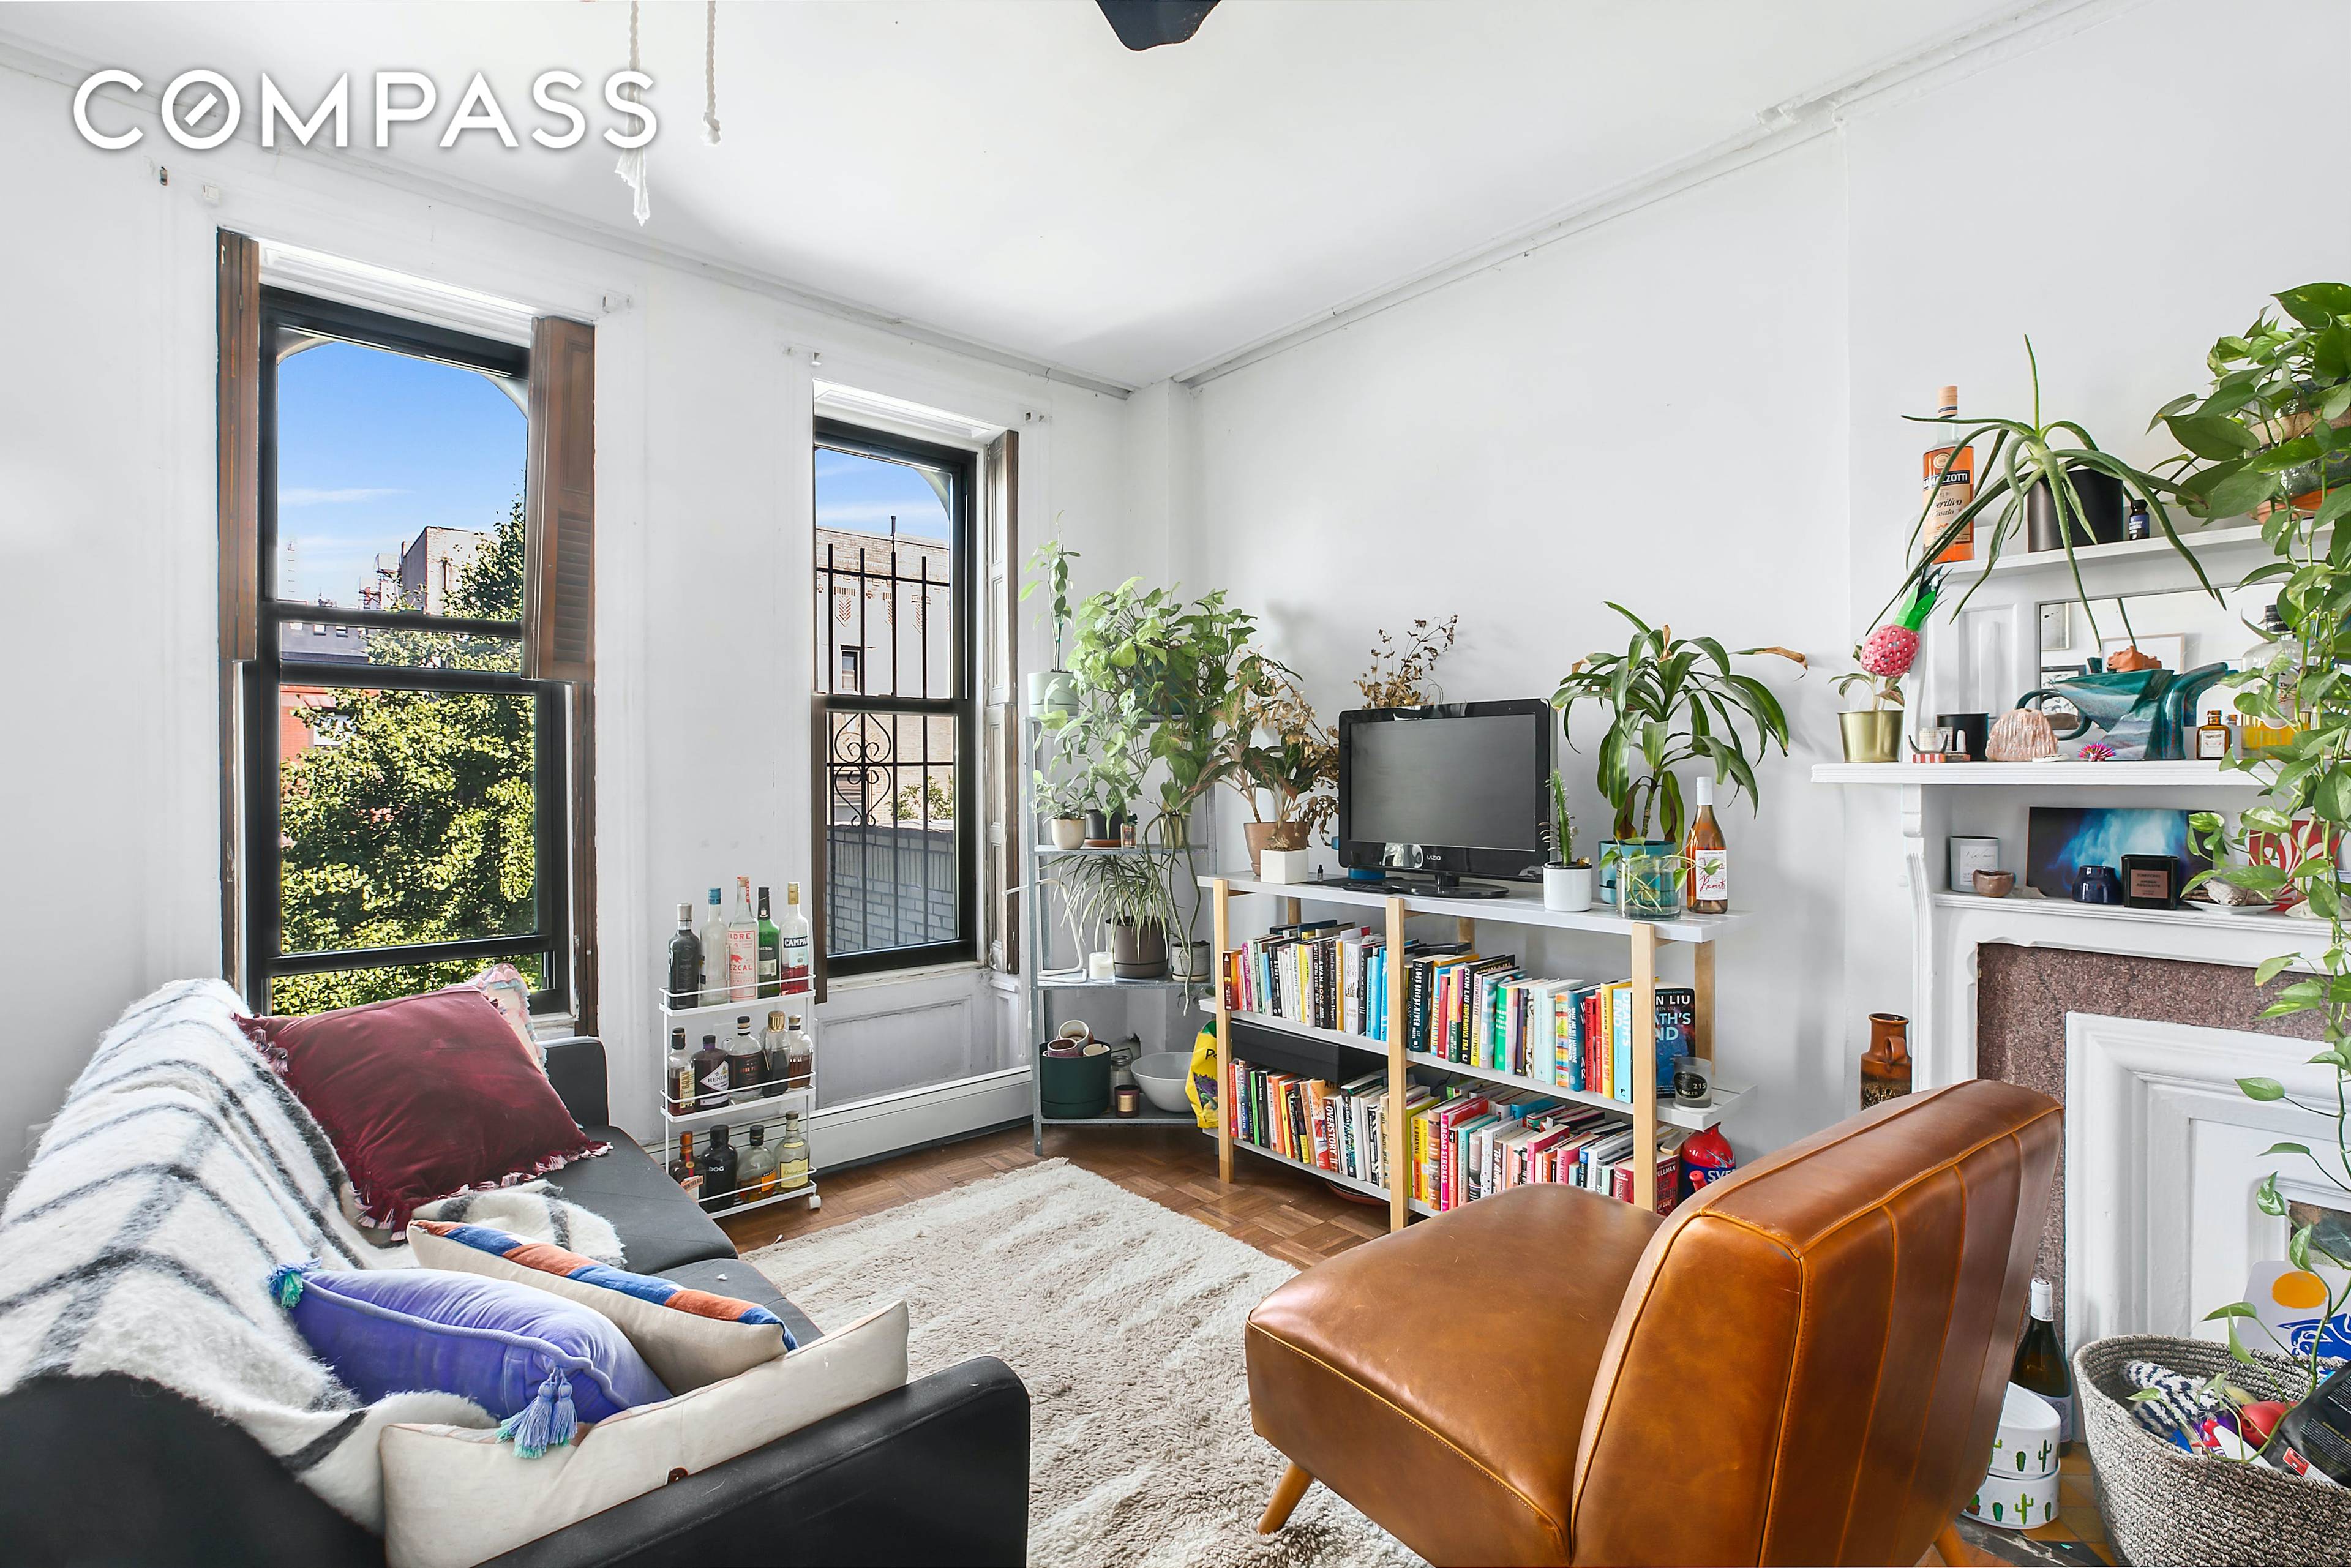 4 Unit brownstone in excellent condition for sale in the heart of Crown Heights.